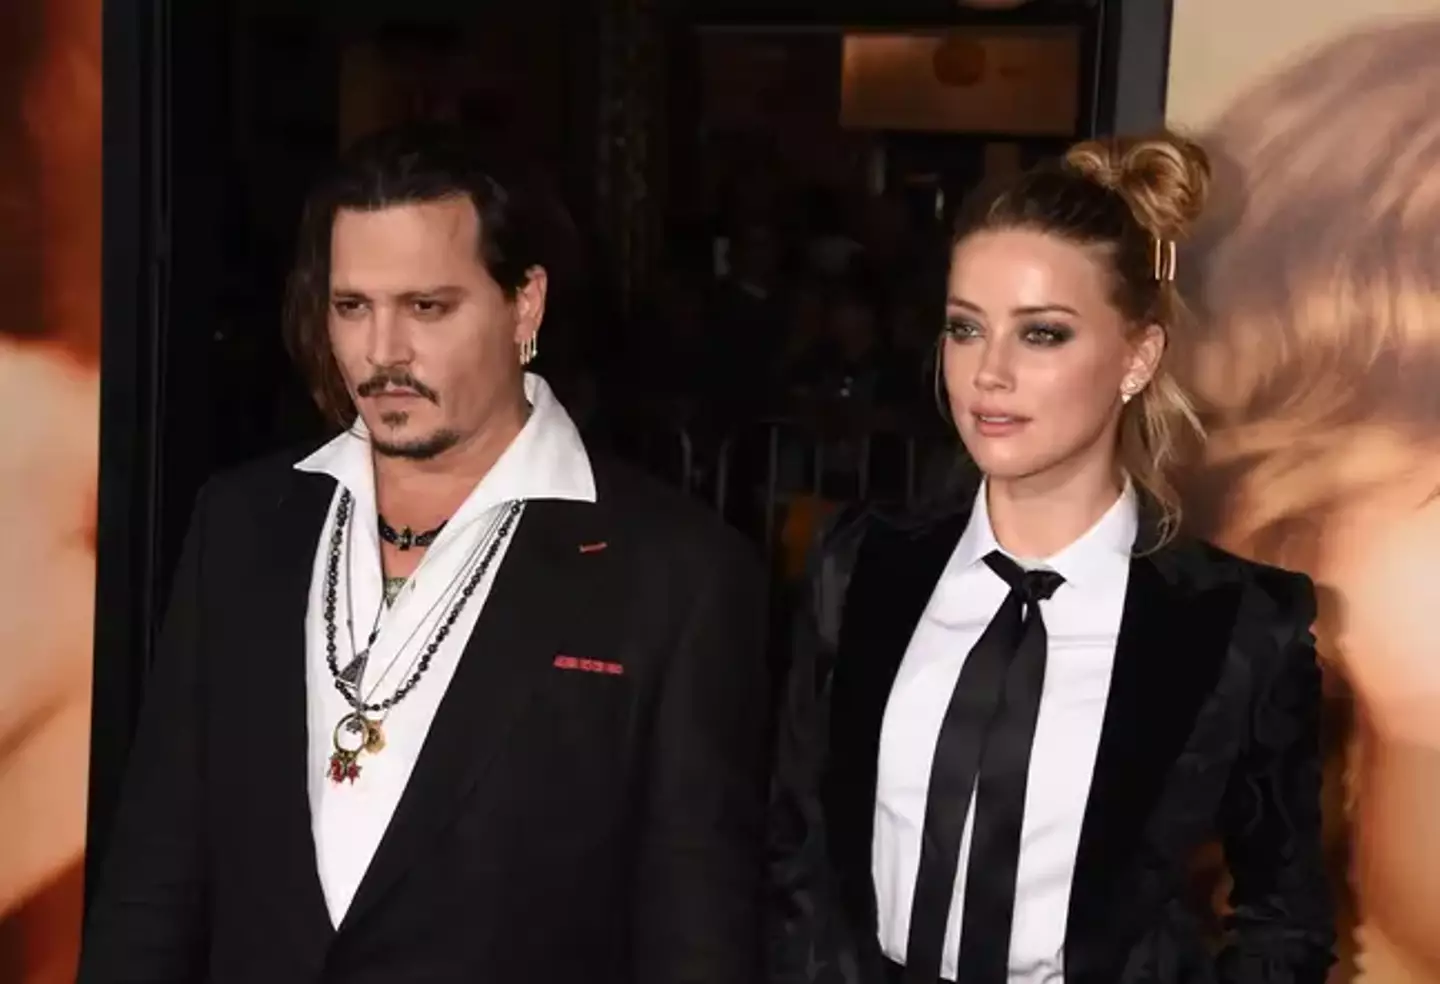 Depp is suing his ex-wife Amber Heard.